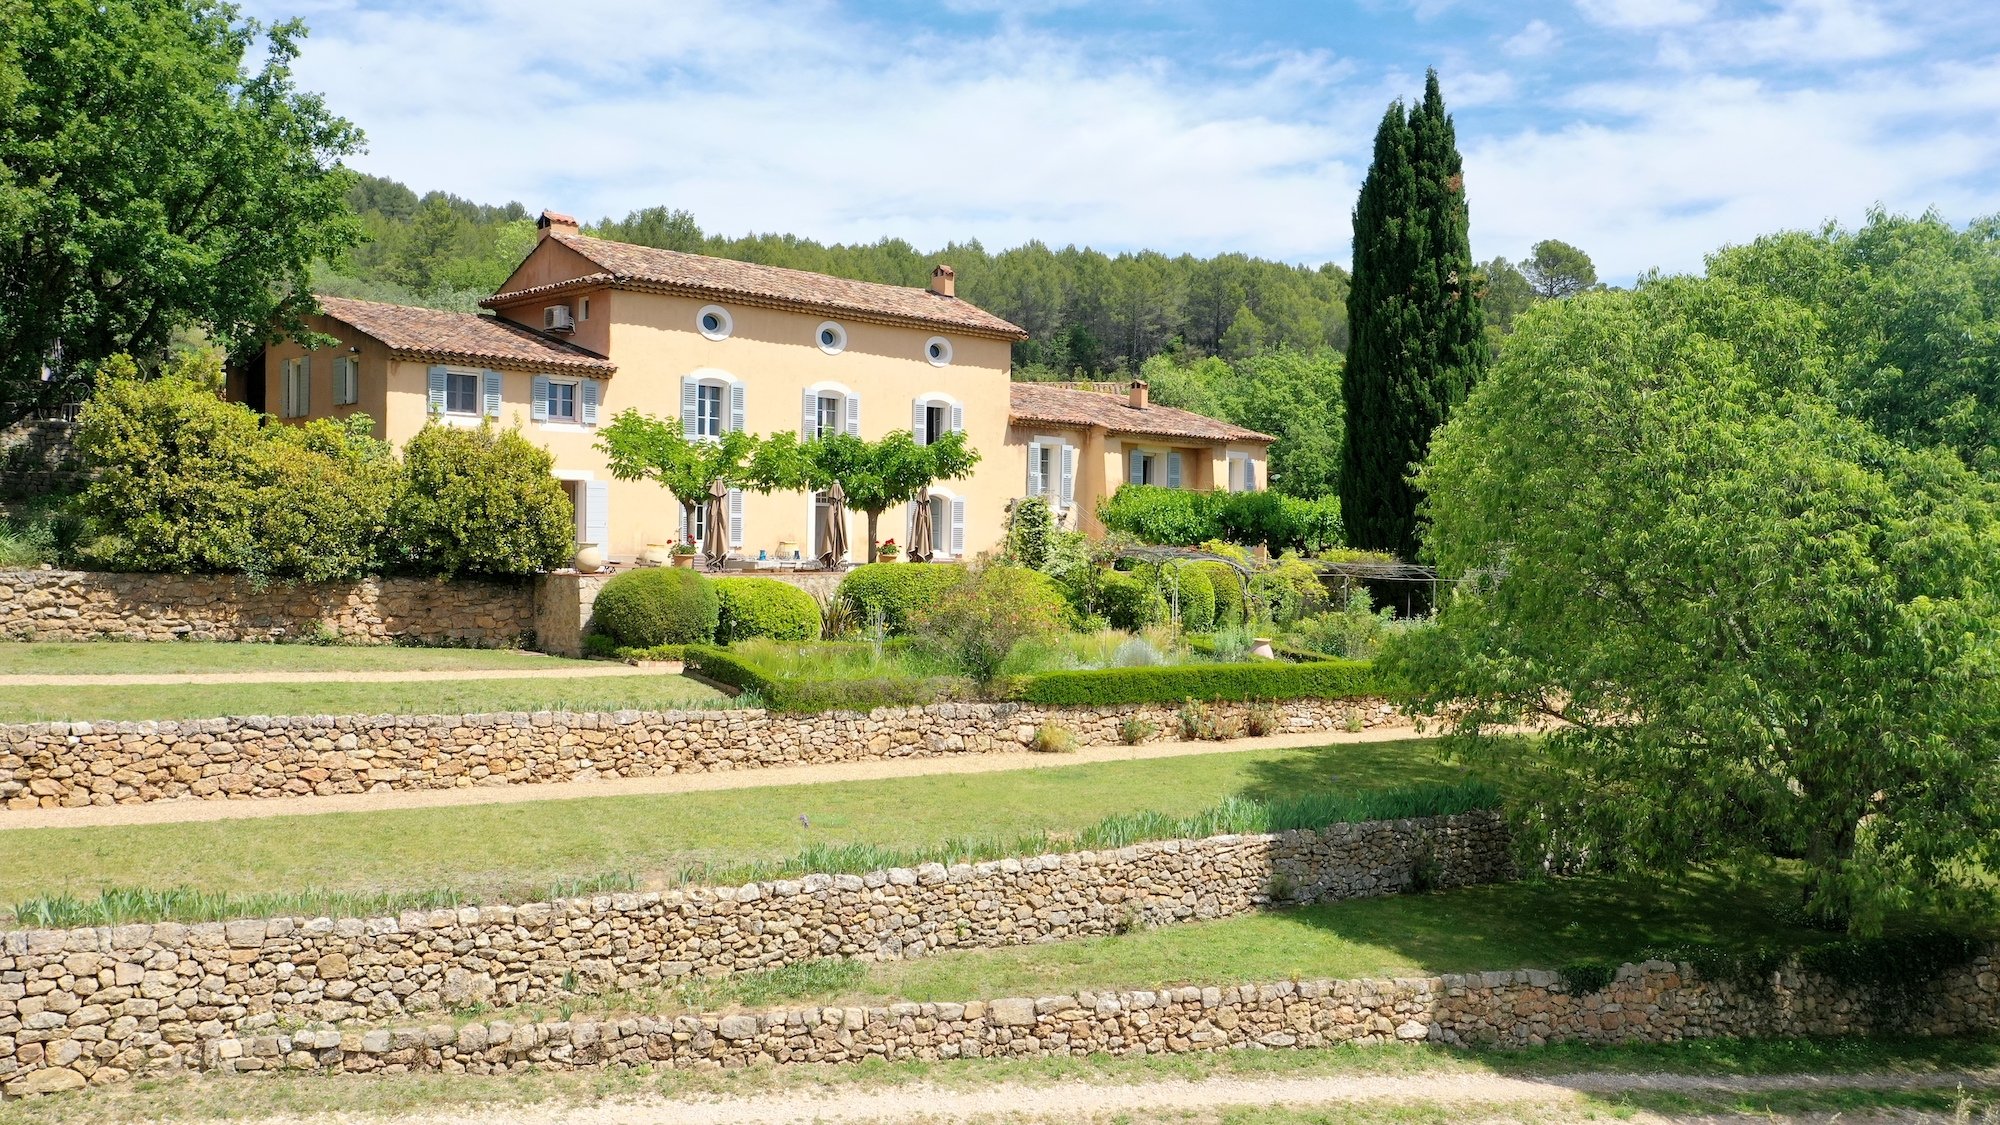 Farmhouse with vineyards and olive groves in the Var, Provence